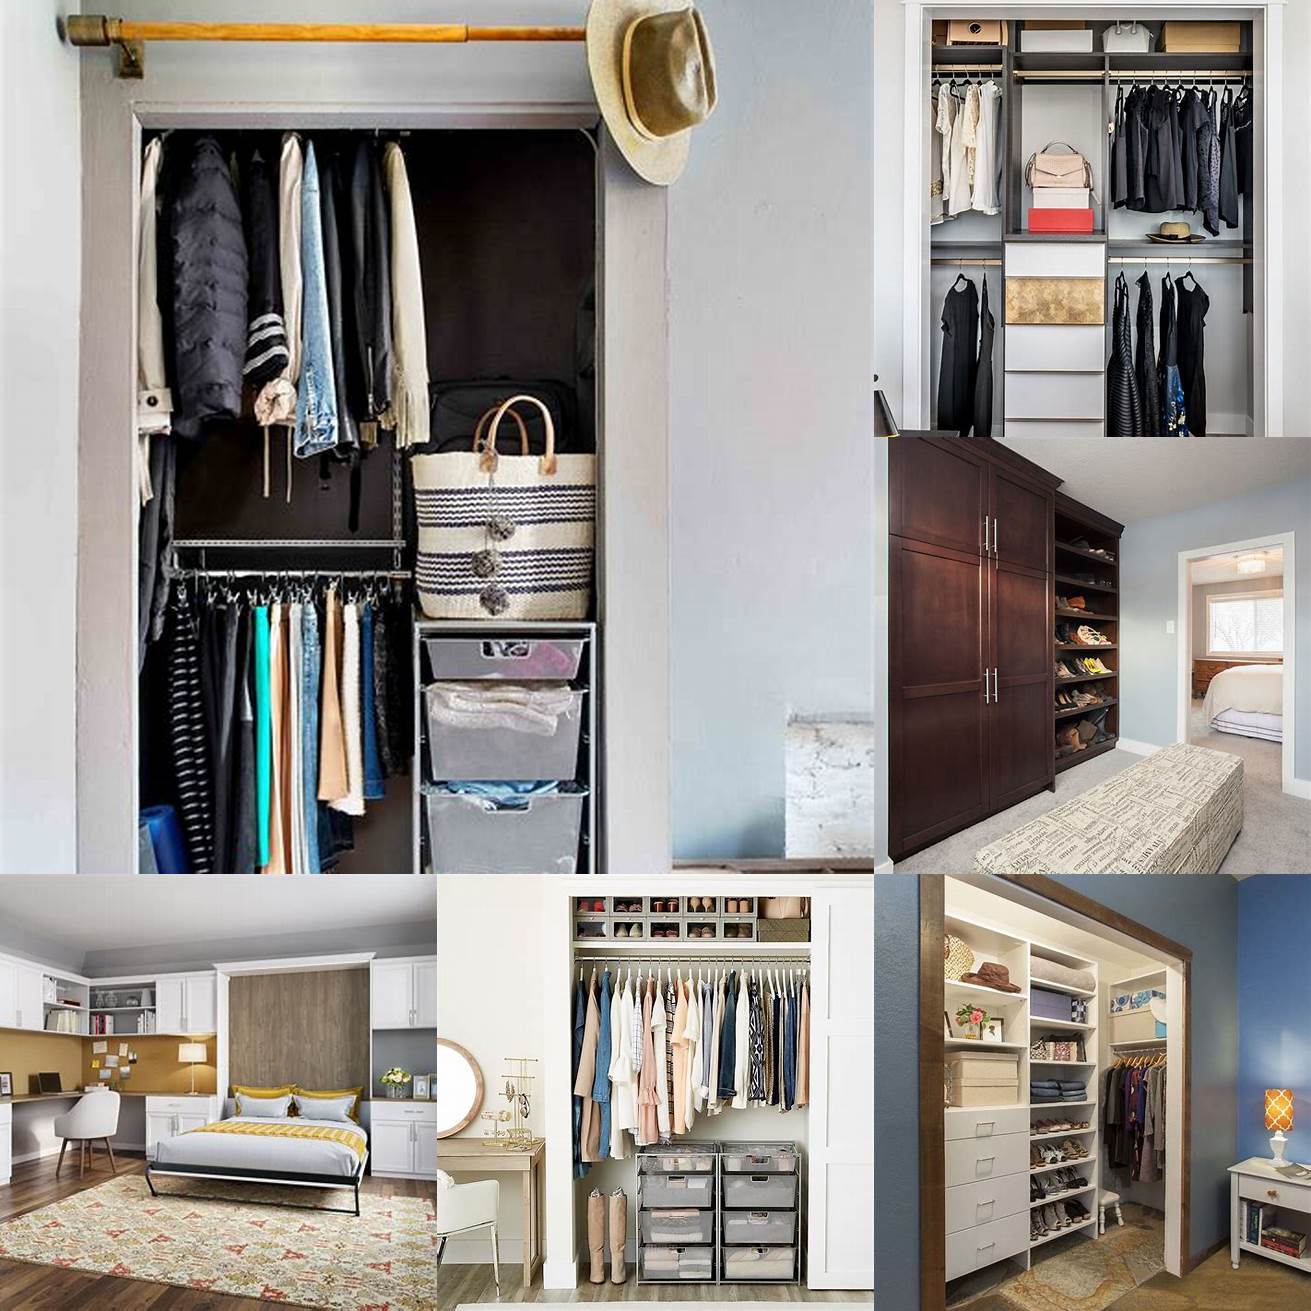 A closet bed can free up valuable floor space in small apartments